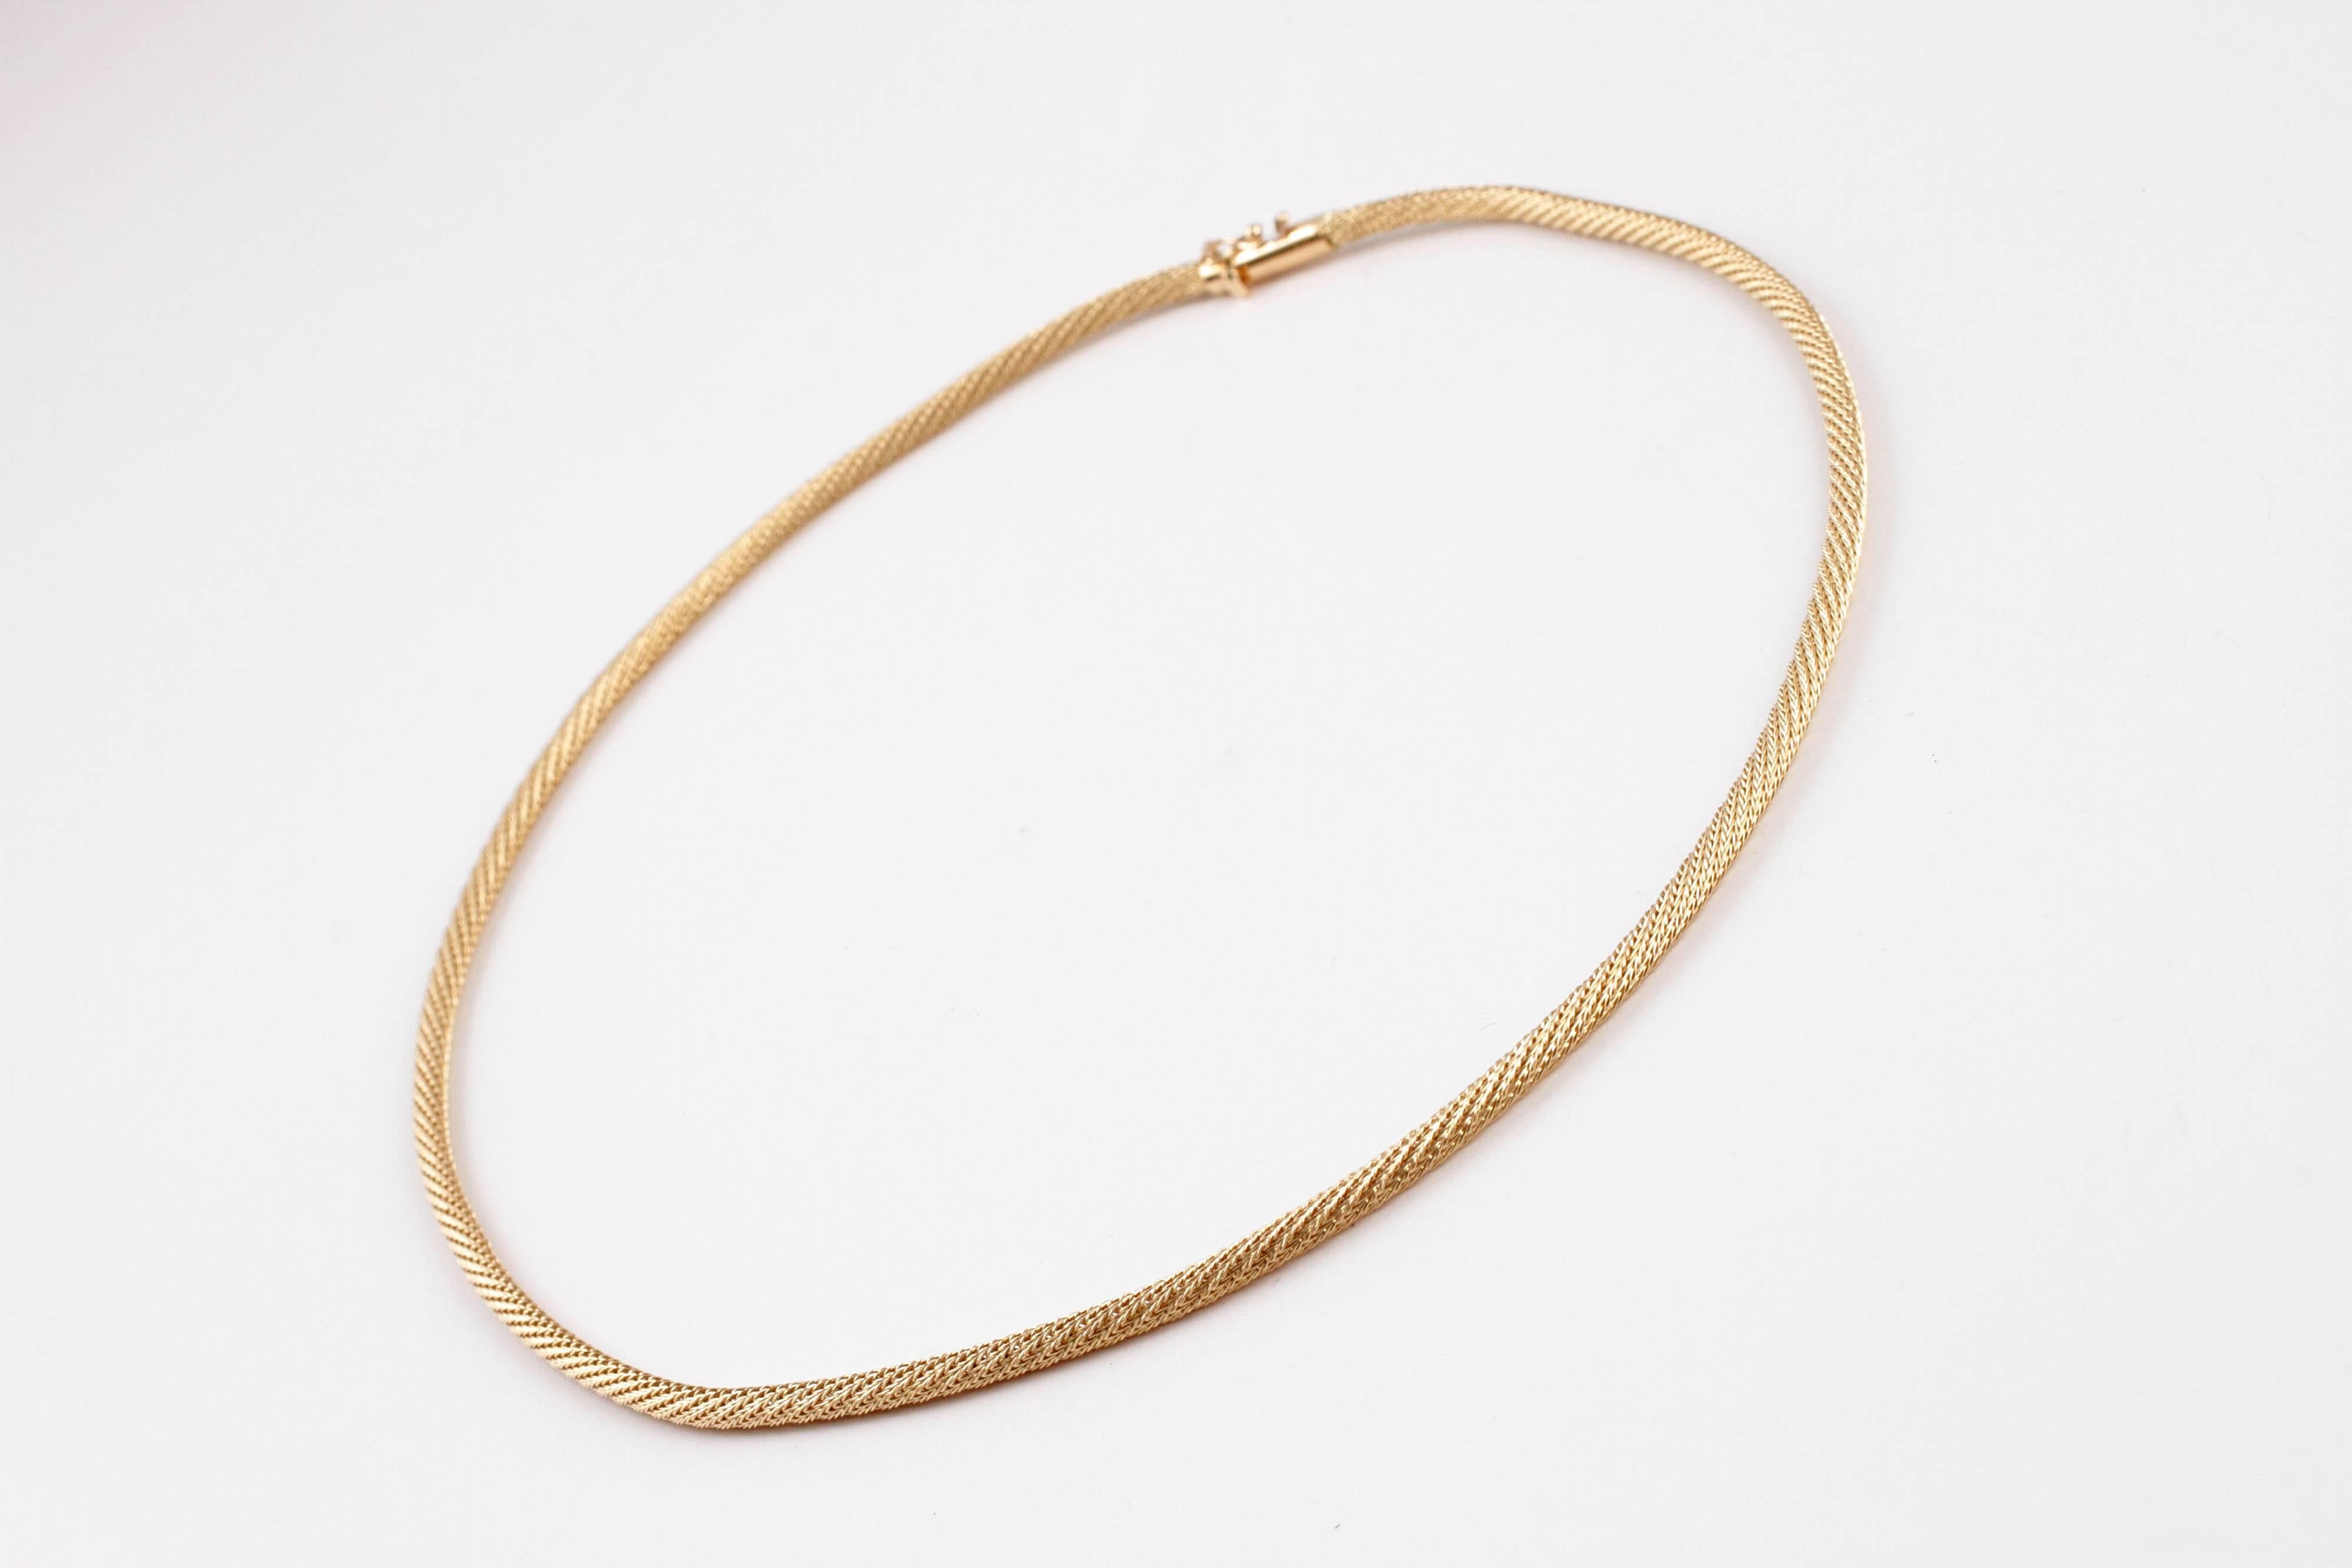 Wear it alone or put your favorite slide on it!  In 10 karat yellow gold, it measures approximately 16 inches in length!